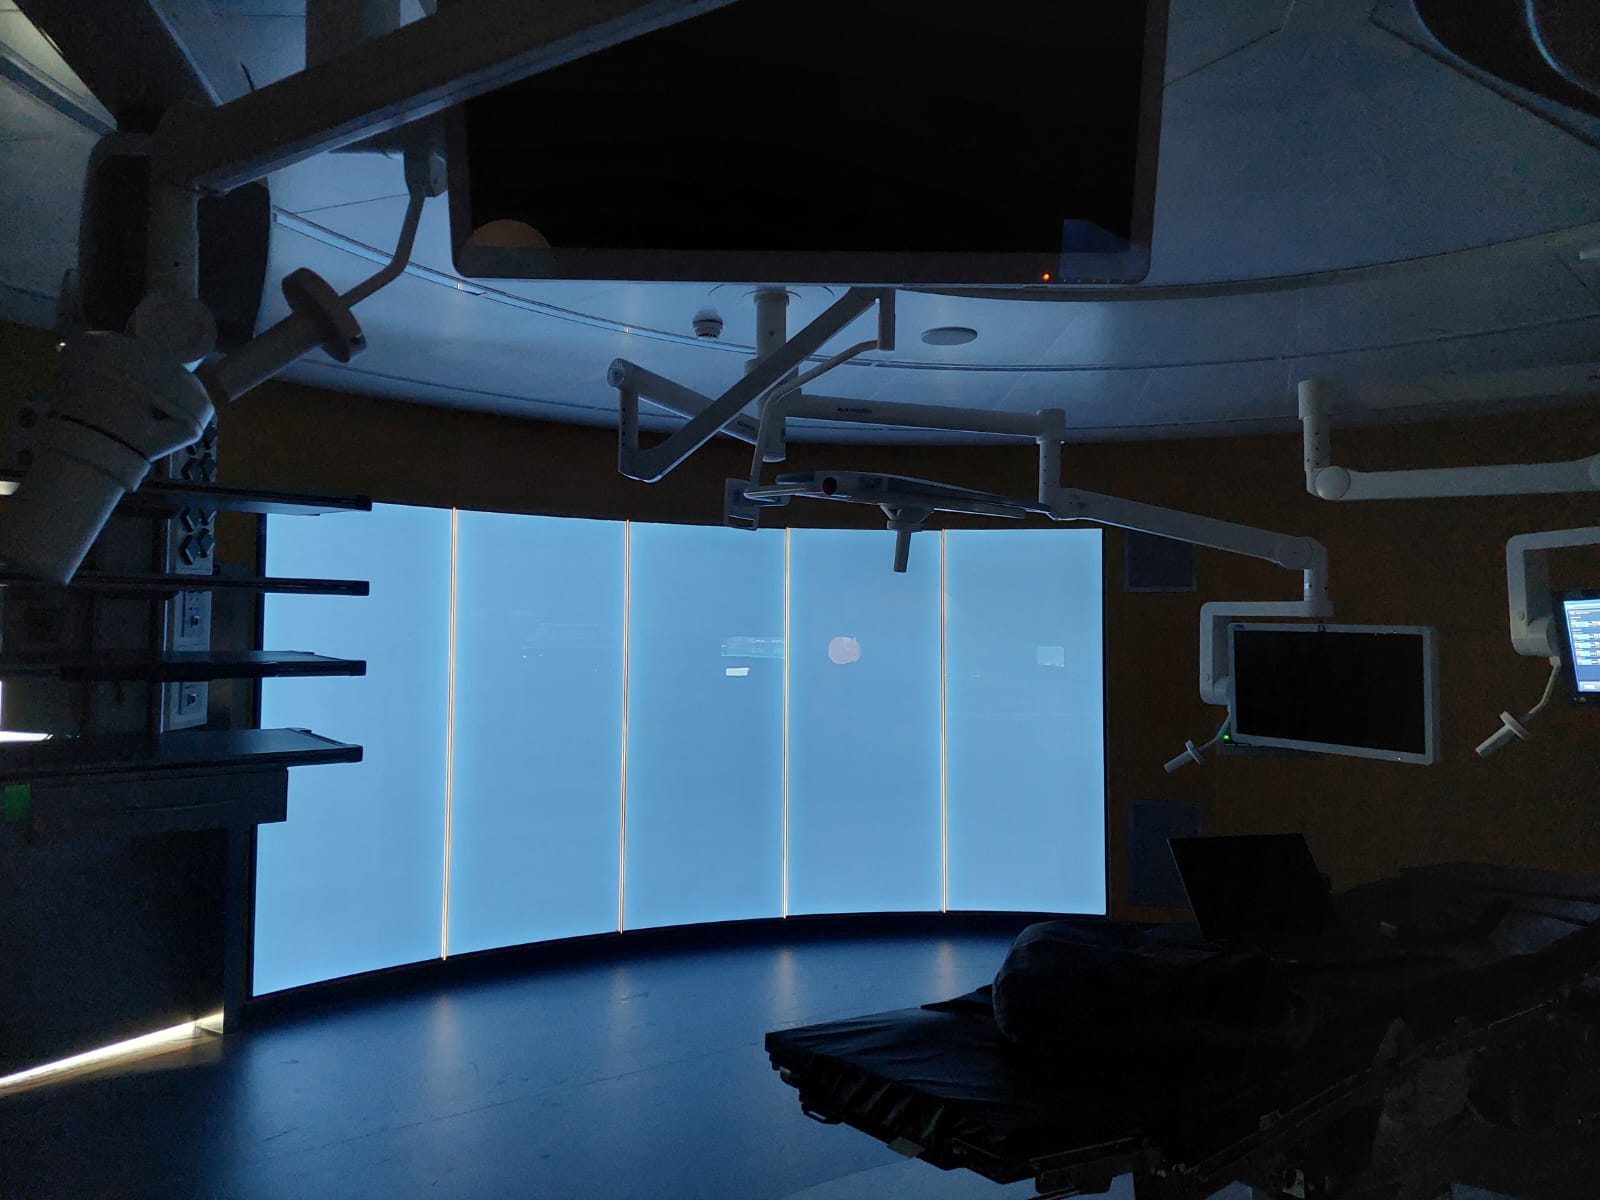 Blackout Smart Glass designs help to improve the overall hygiene and usability of this surgery theatre based in Portugal. The image showcases the privacy setting of the glass.